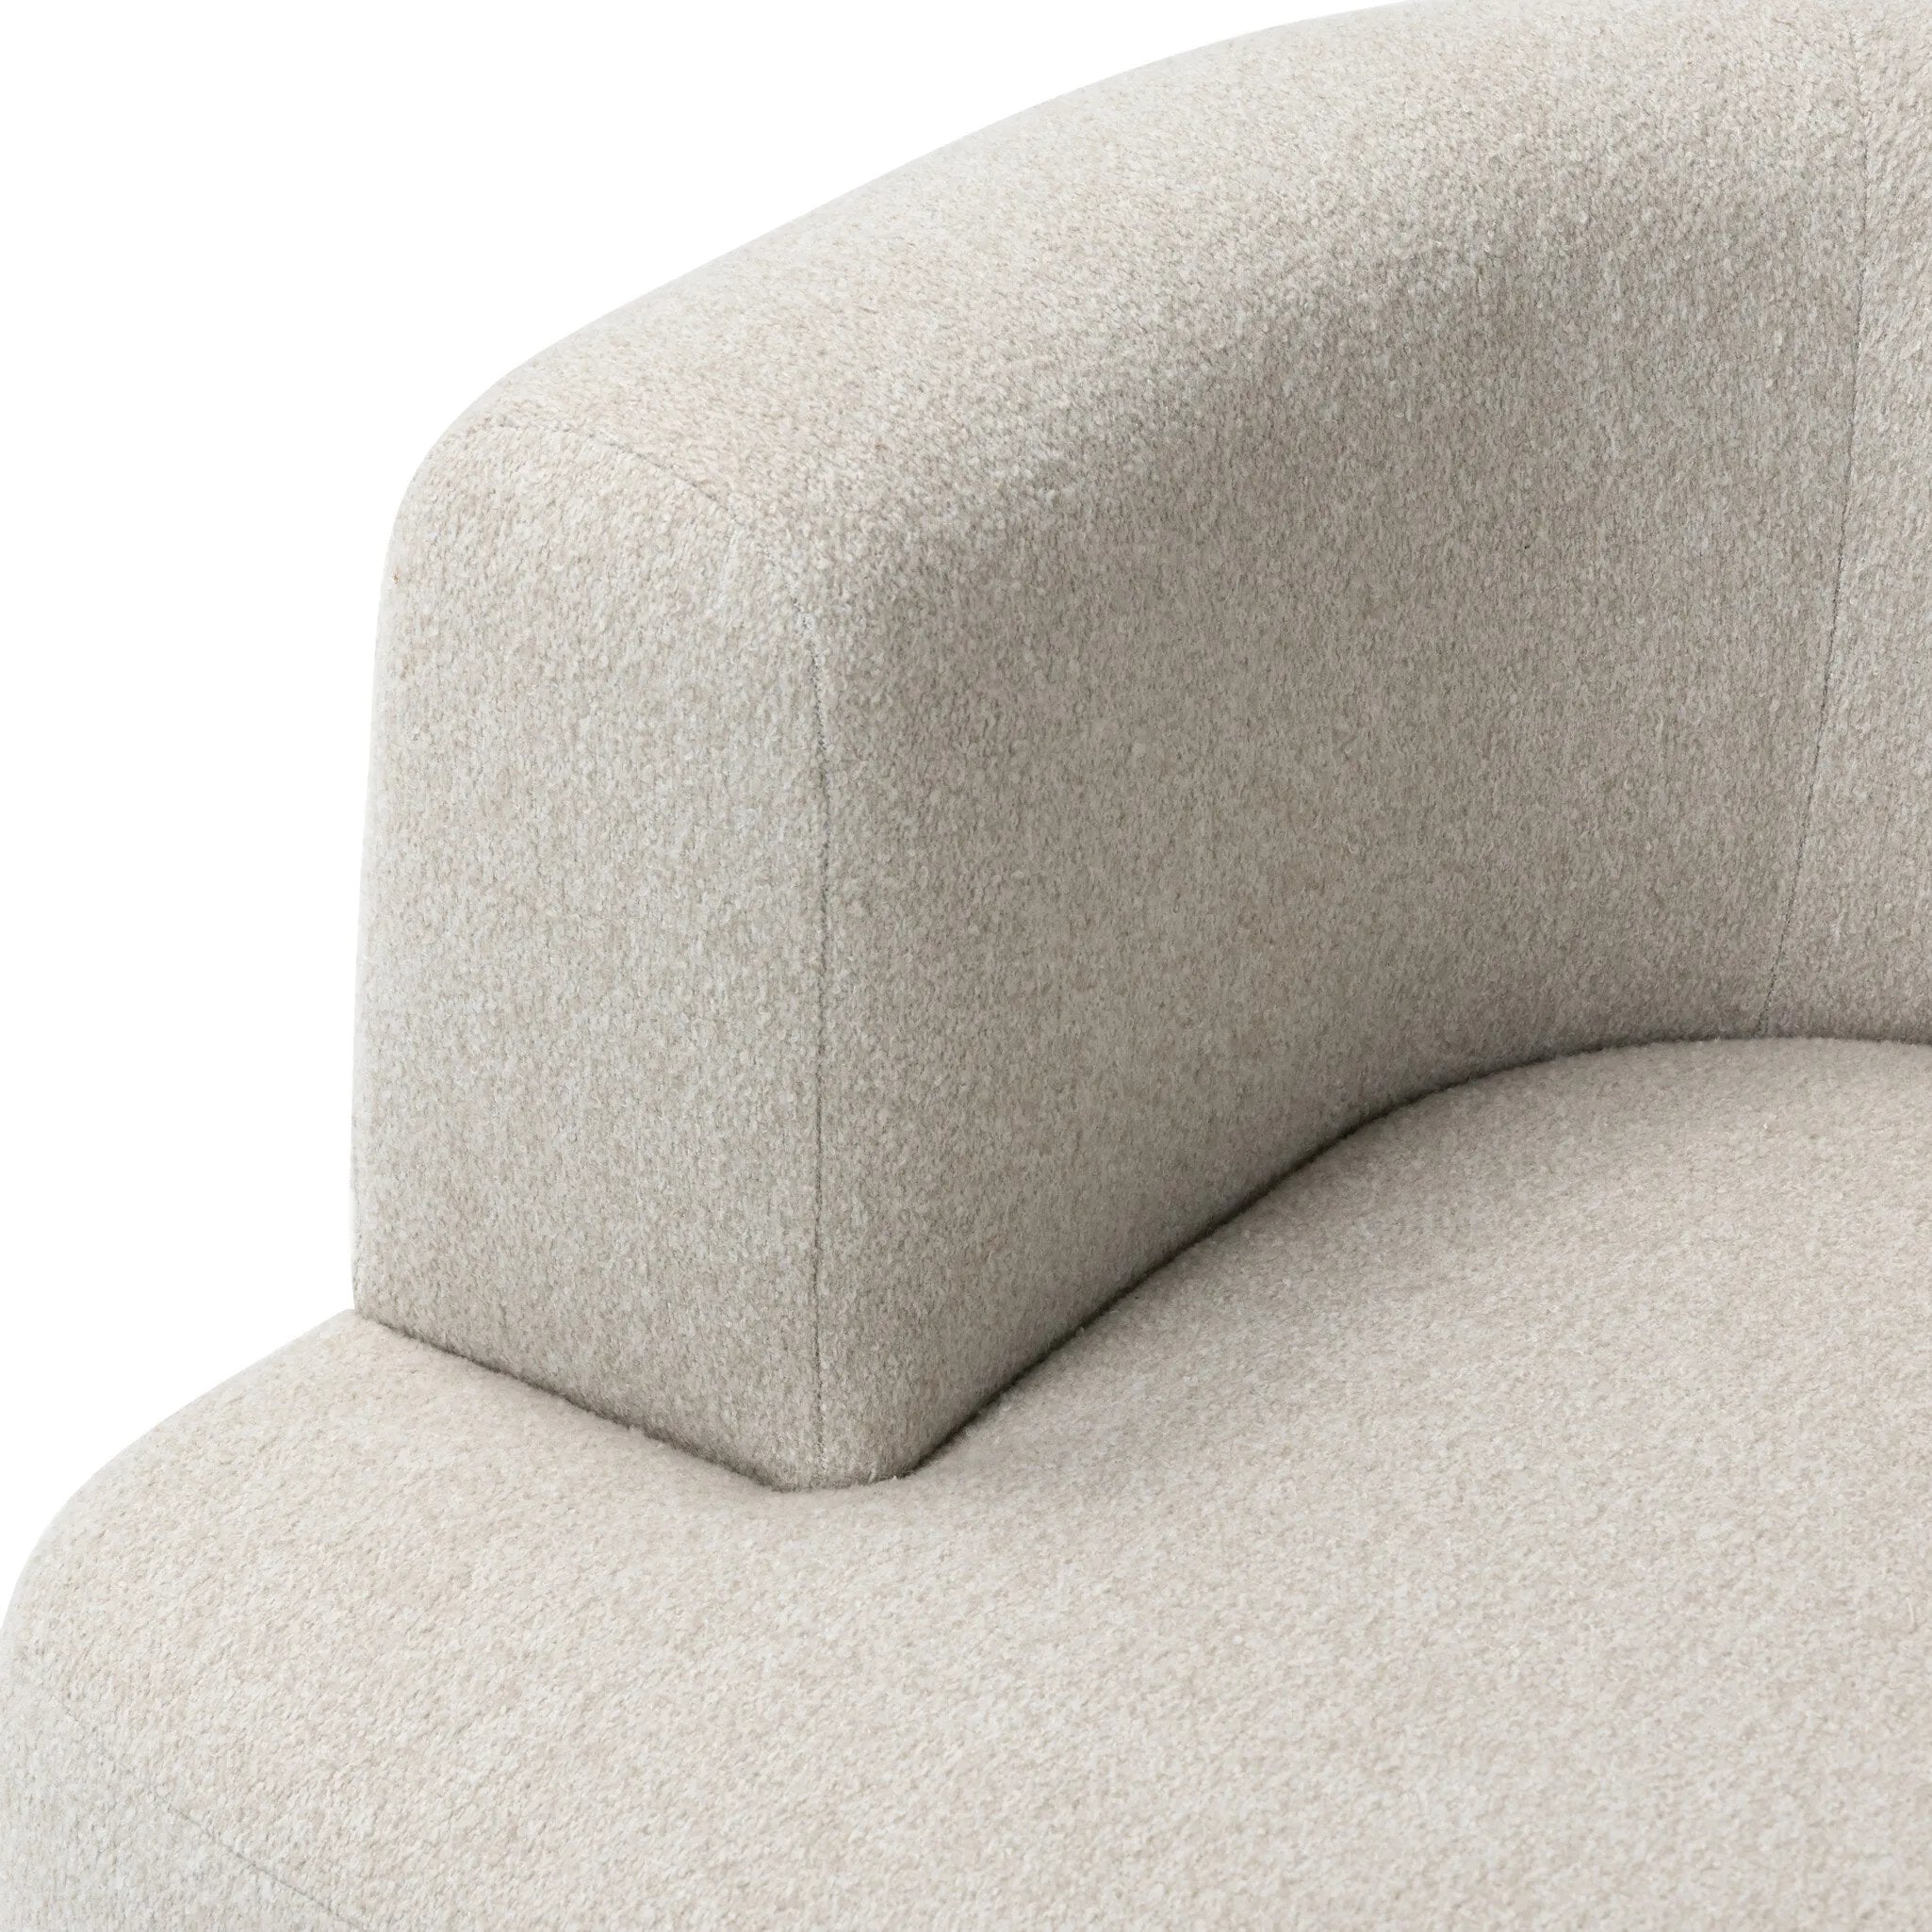 This contemporary wraparound chair melds two forms for a study in seamless balance. The seat's modern form is neutralized with an understated pebble color, while sleek cutouts emphasize the tri-leg base.Collection: Farro Amethyst Home provides interior design, new home construction design consulting, vintage area rugs, and lighting in the Des Moines metro area.